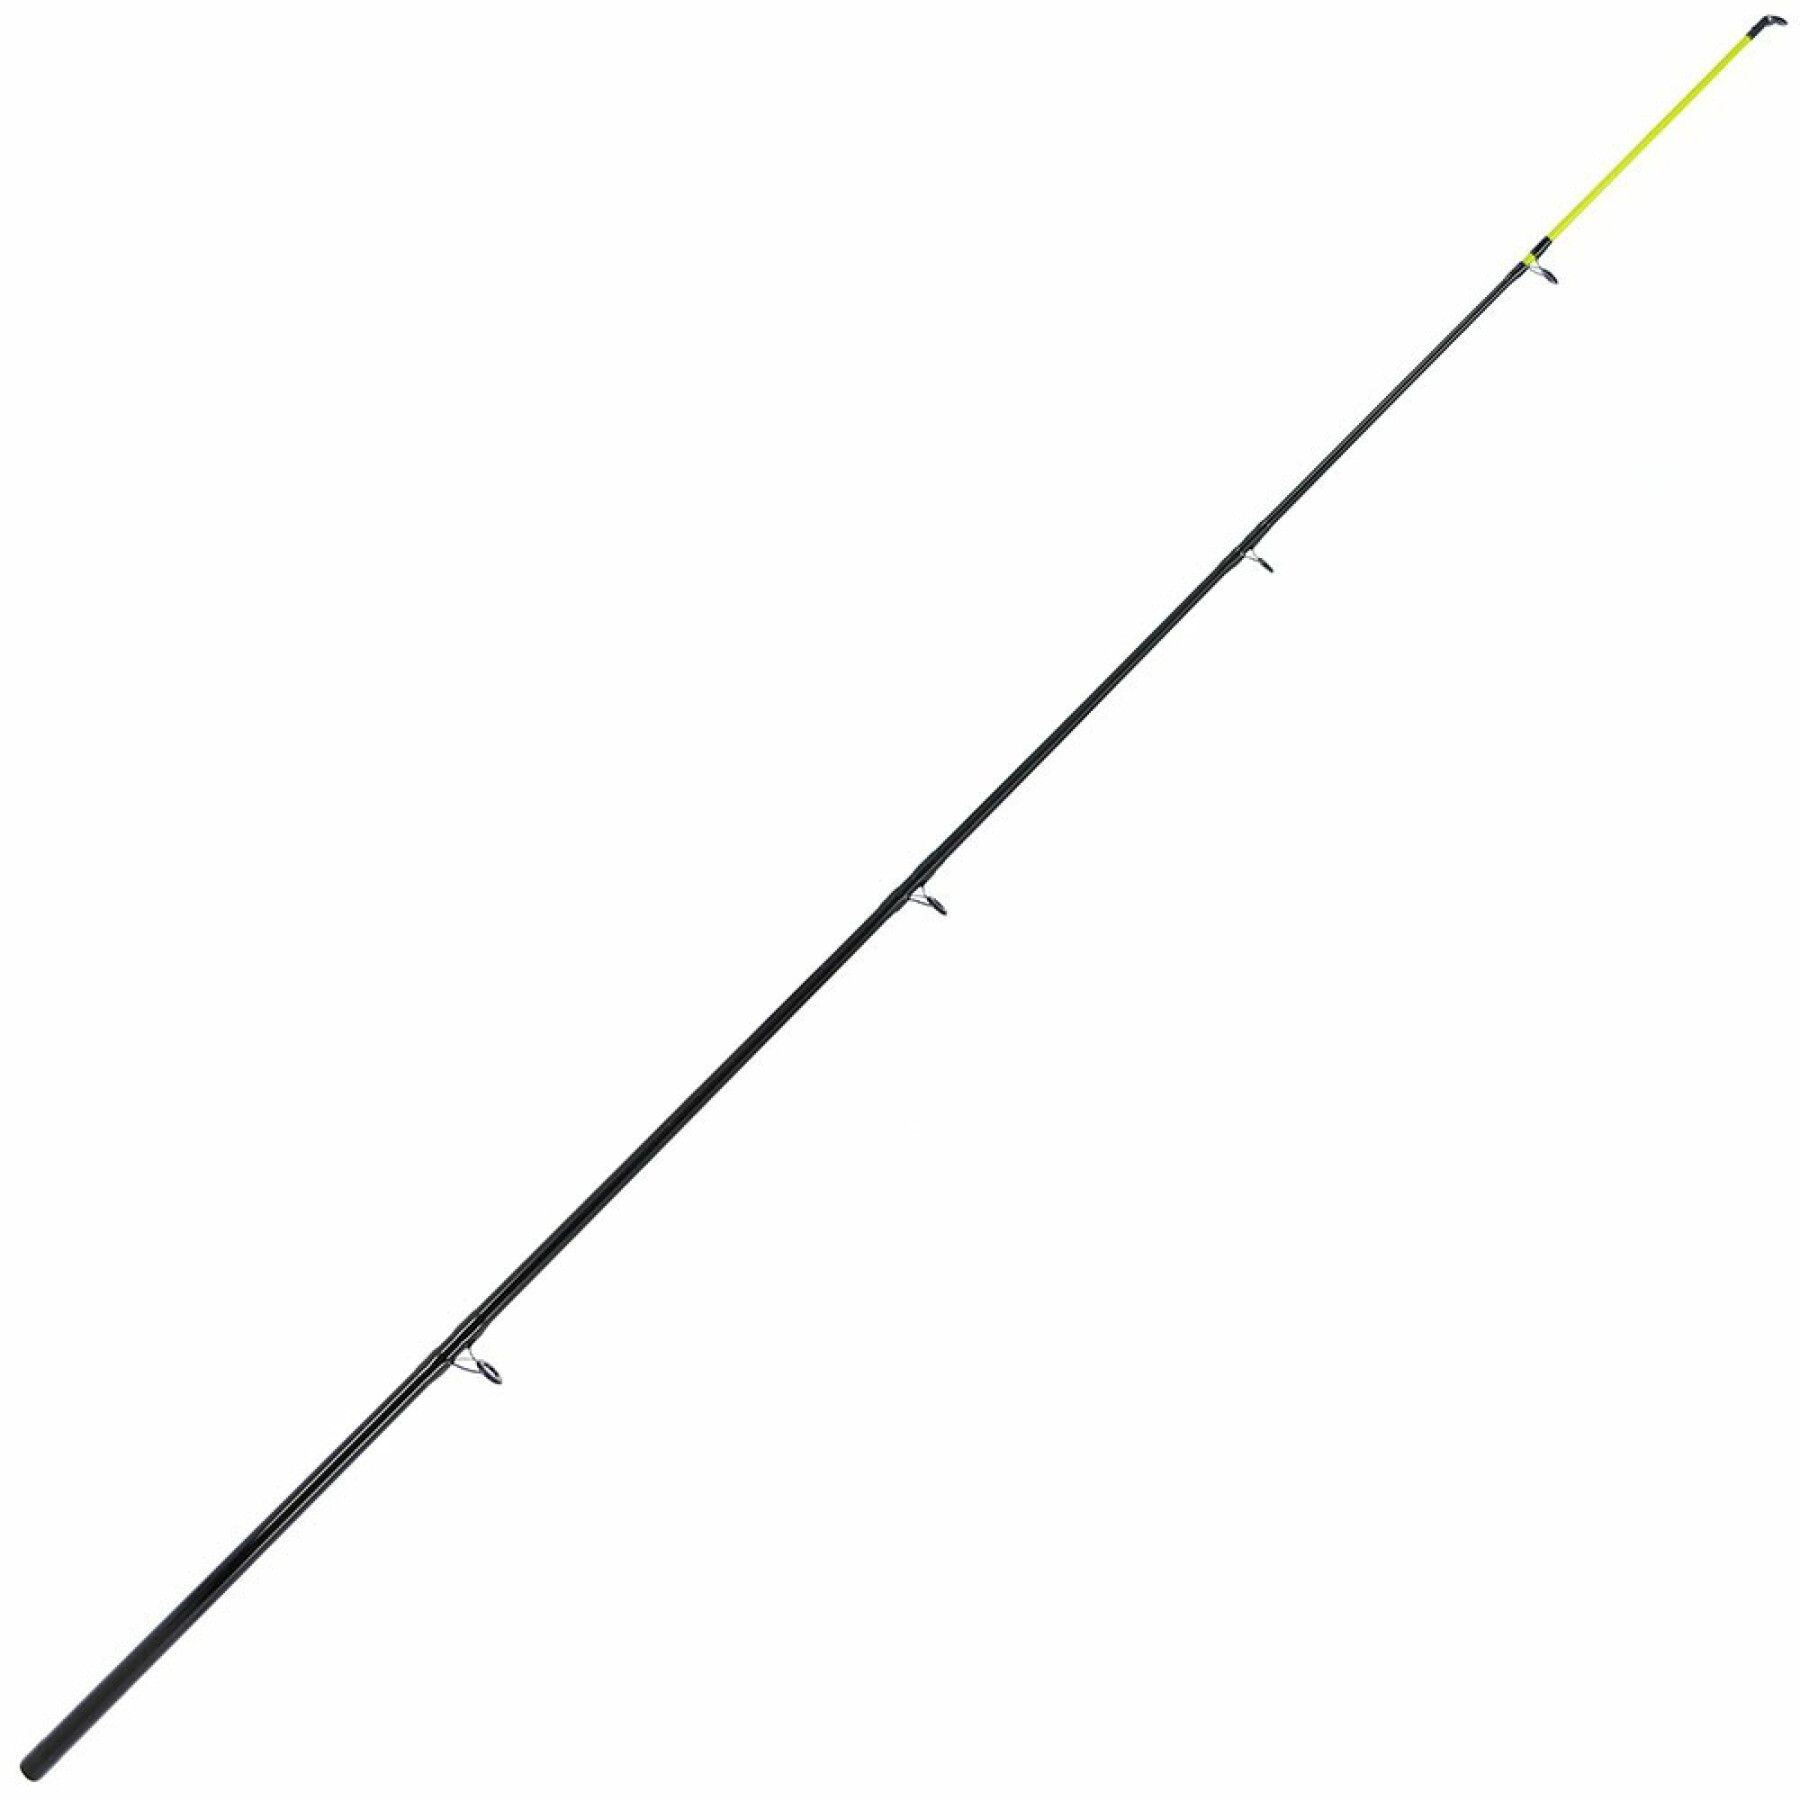 Spazierstock (Glasfaser) Angling Pursuits Beachcaster Max